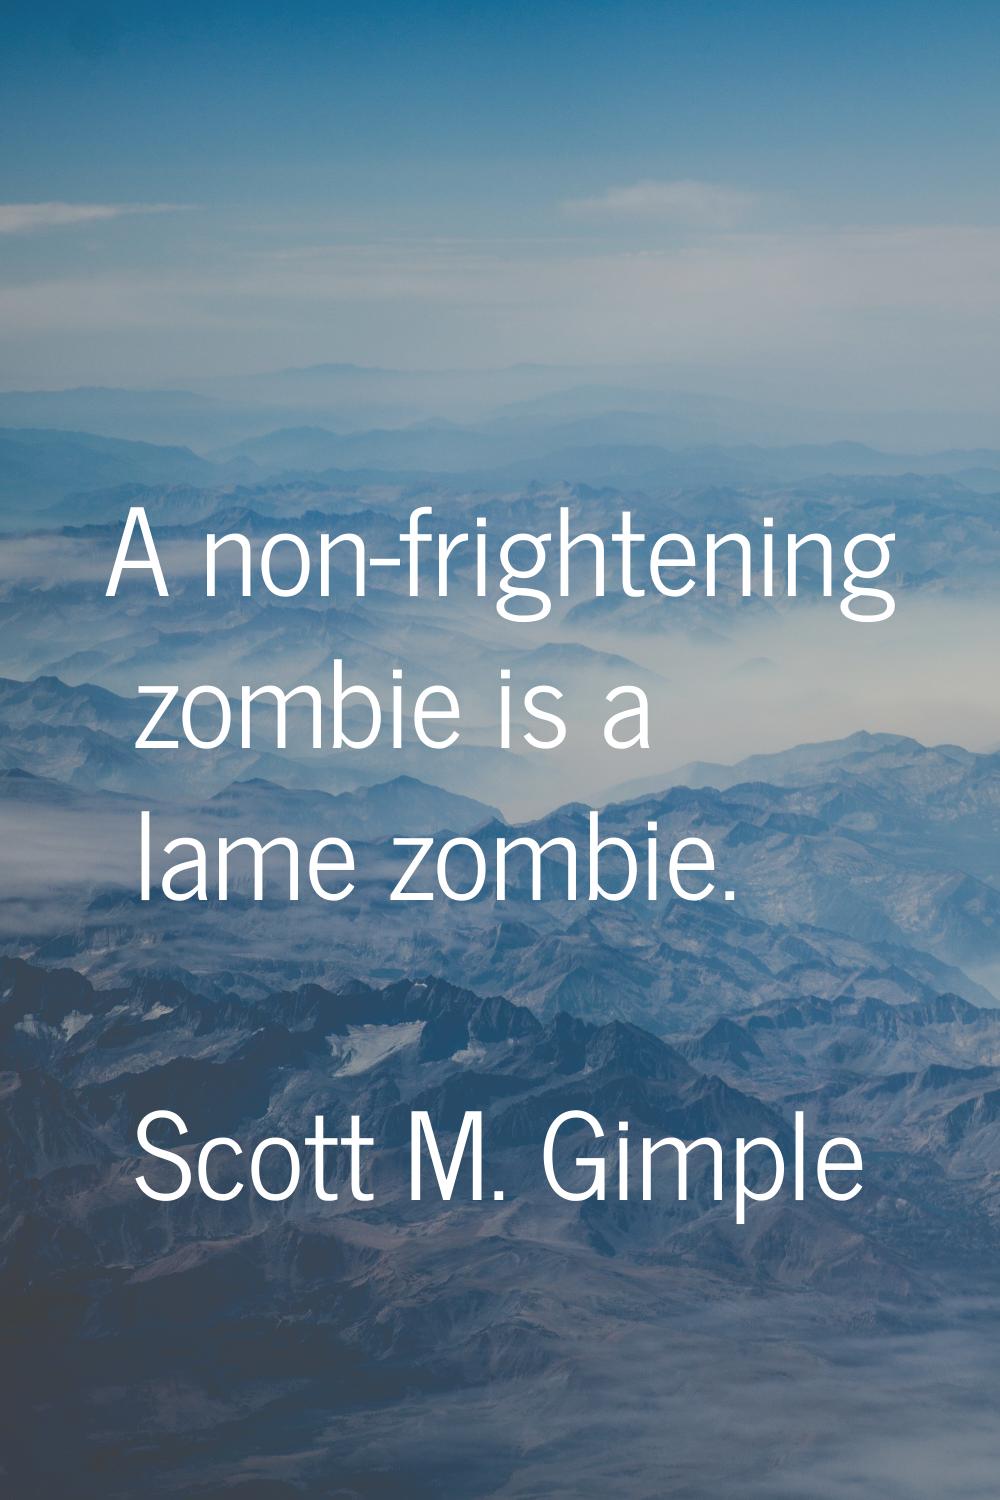 A non-frightening zombie is a lame zombie.